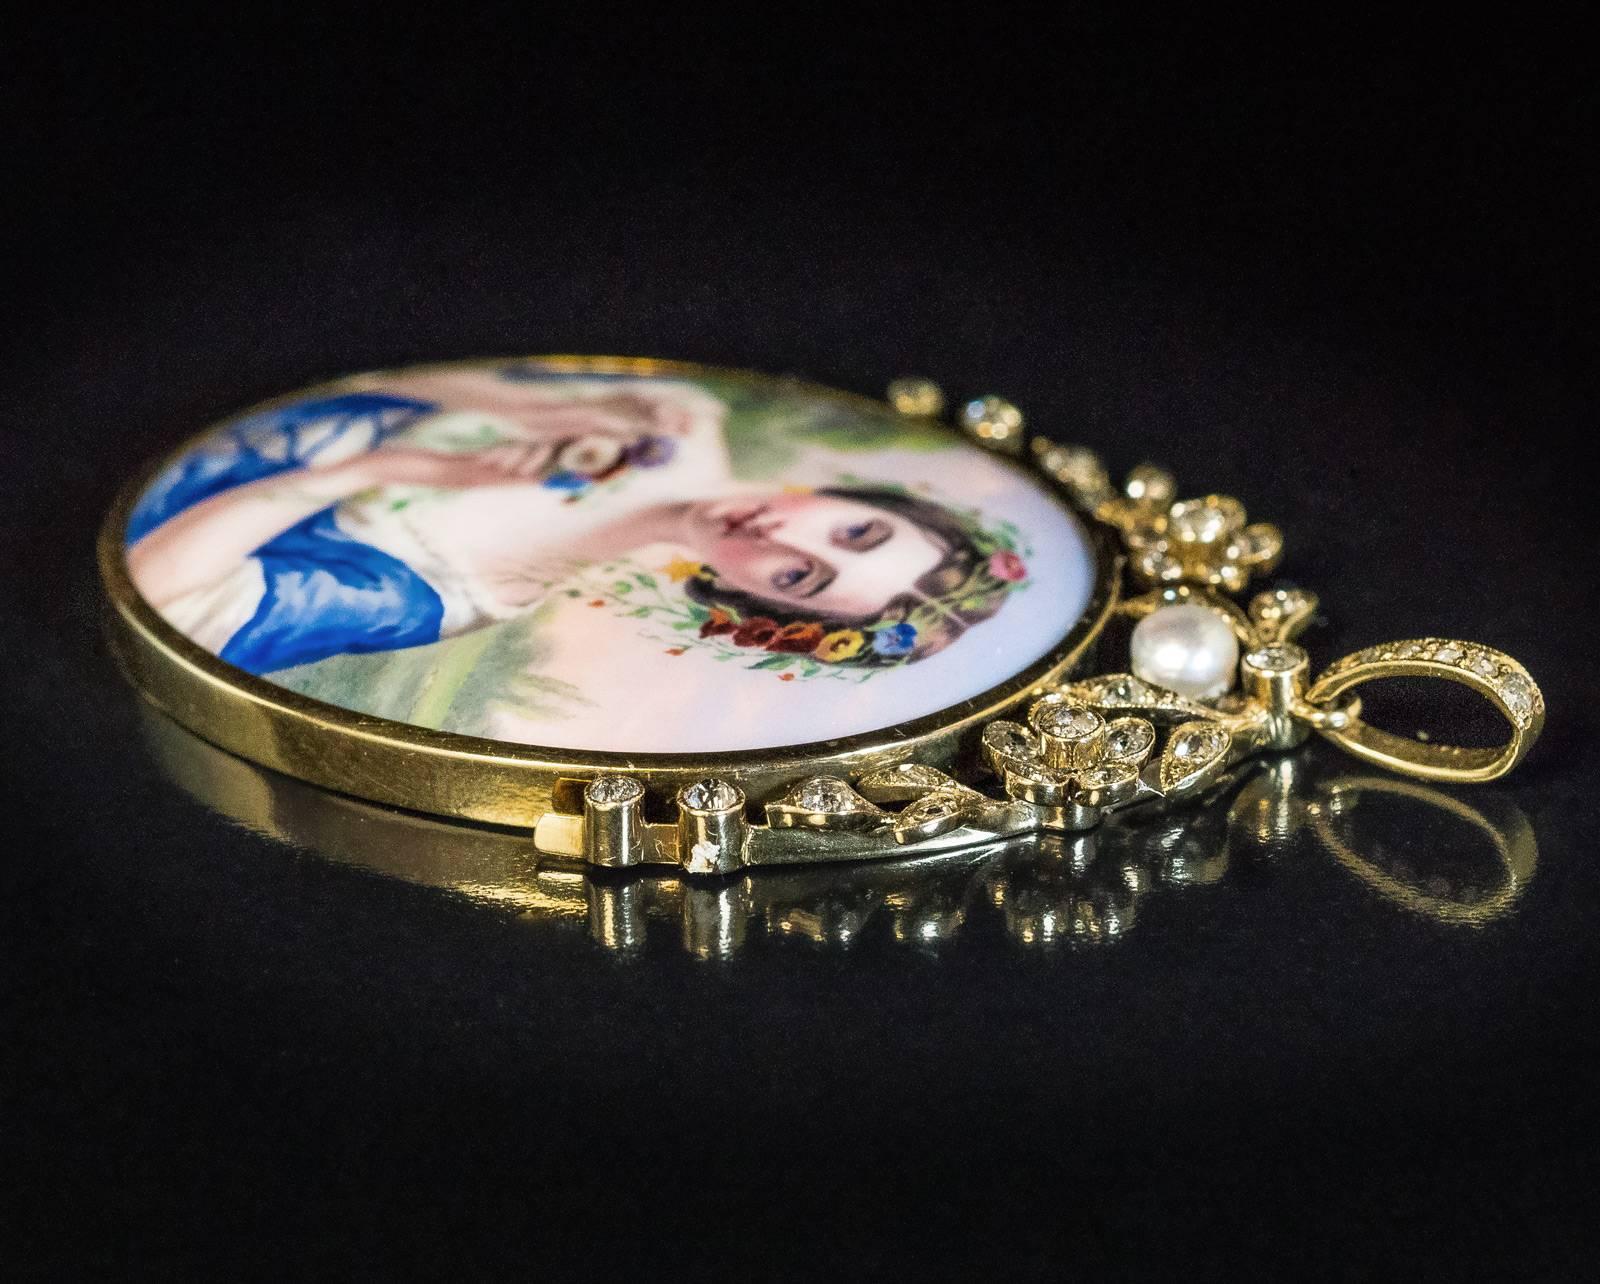 A large antique finely painted enamel miniature of a Swiss girl set in a 14K gold, diamond and natural pearl pendant, made in Geneva, Switzerland, c. 1860.

Estimated total diamond weight is 1 carat.

Total length with bail is 65 mm (2 1/2 in.)

The